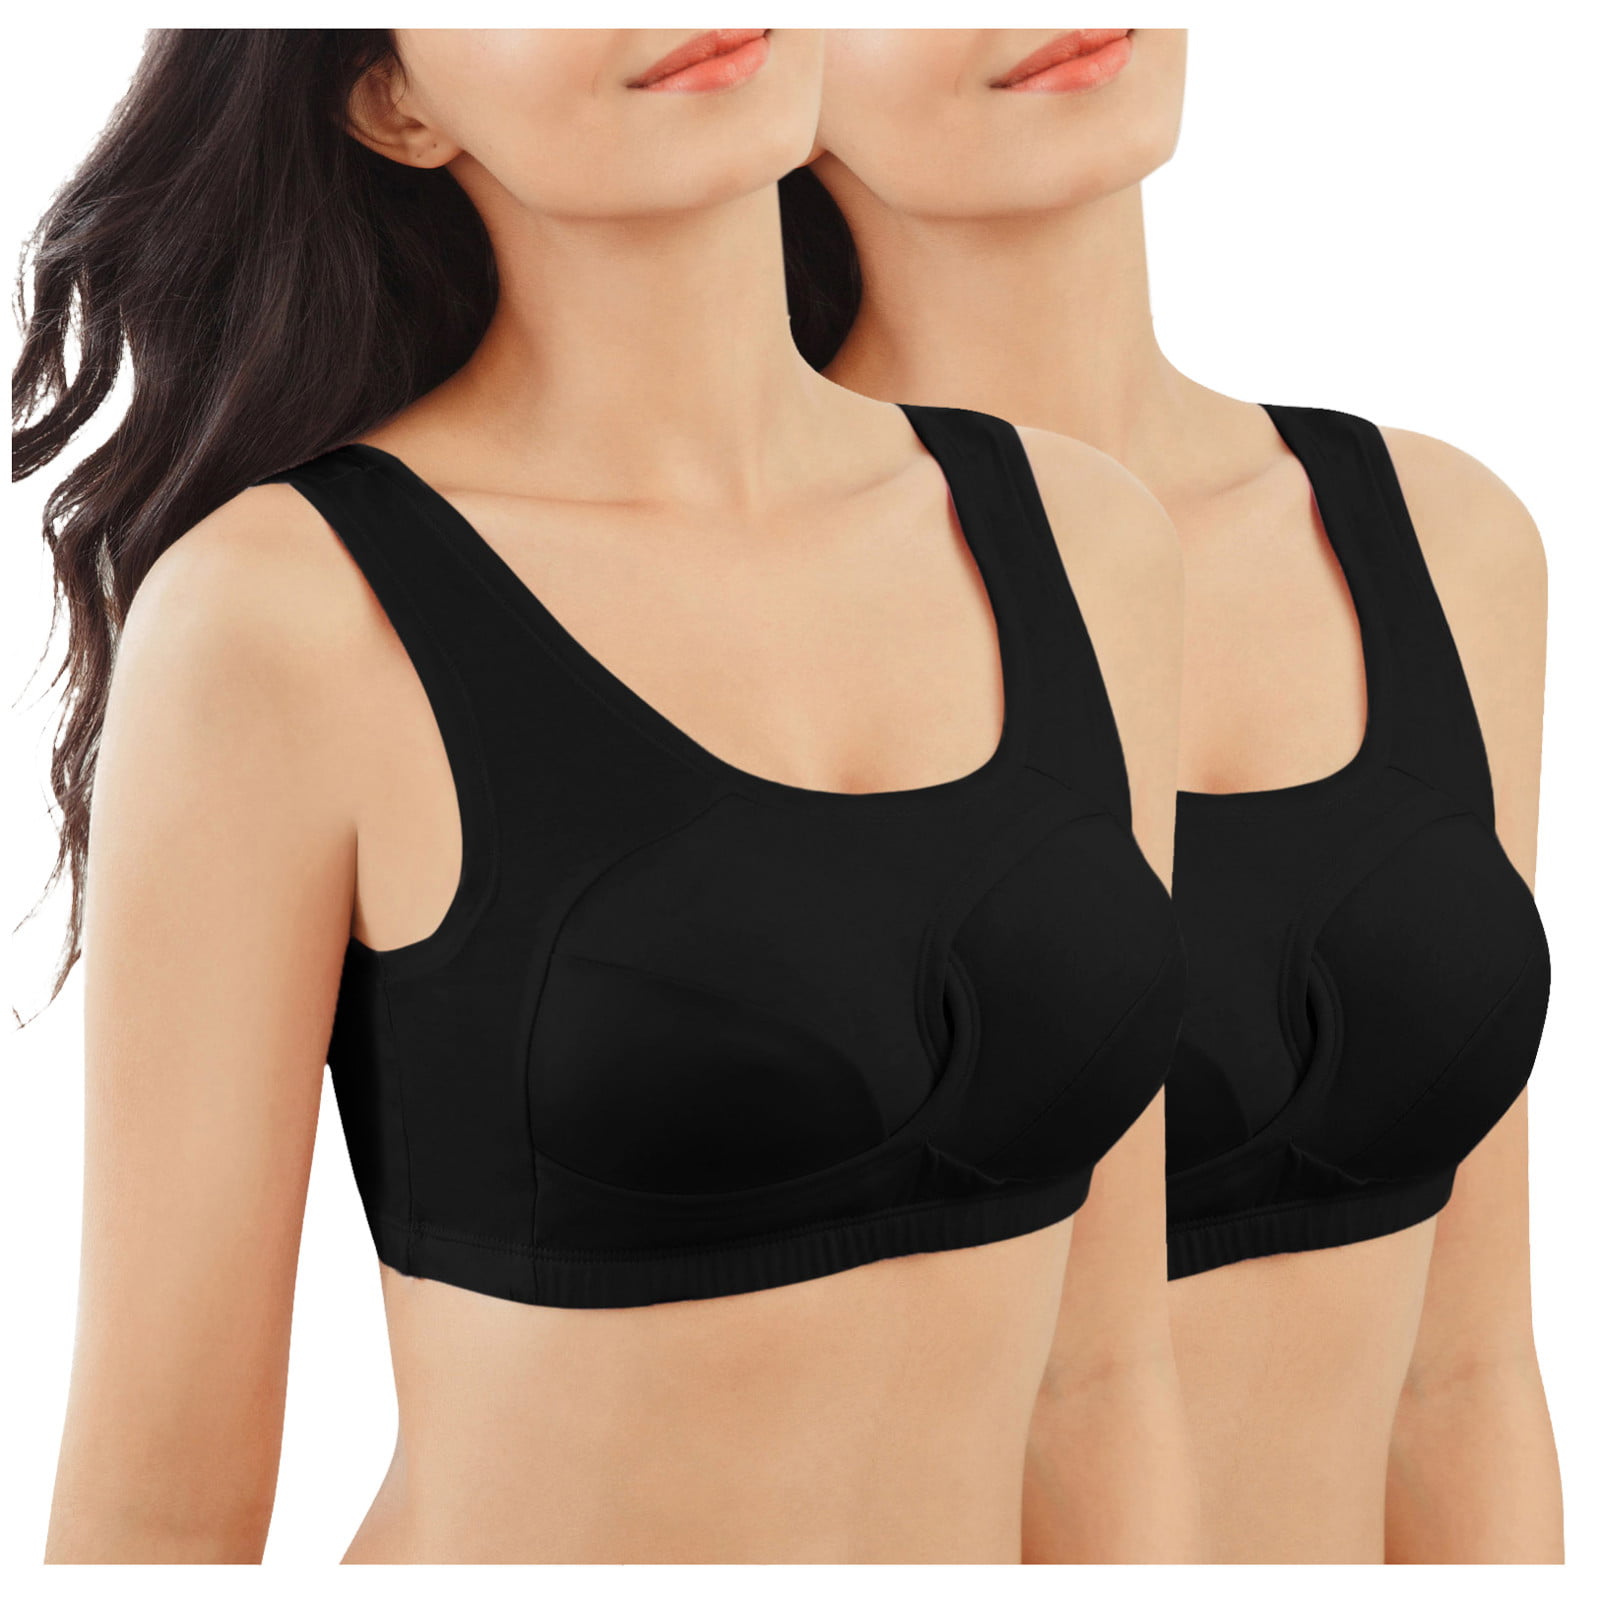 Details about   Women Sports Bras Tops Gym Activewear Yoga Training Fitness Energy Seamless Gym